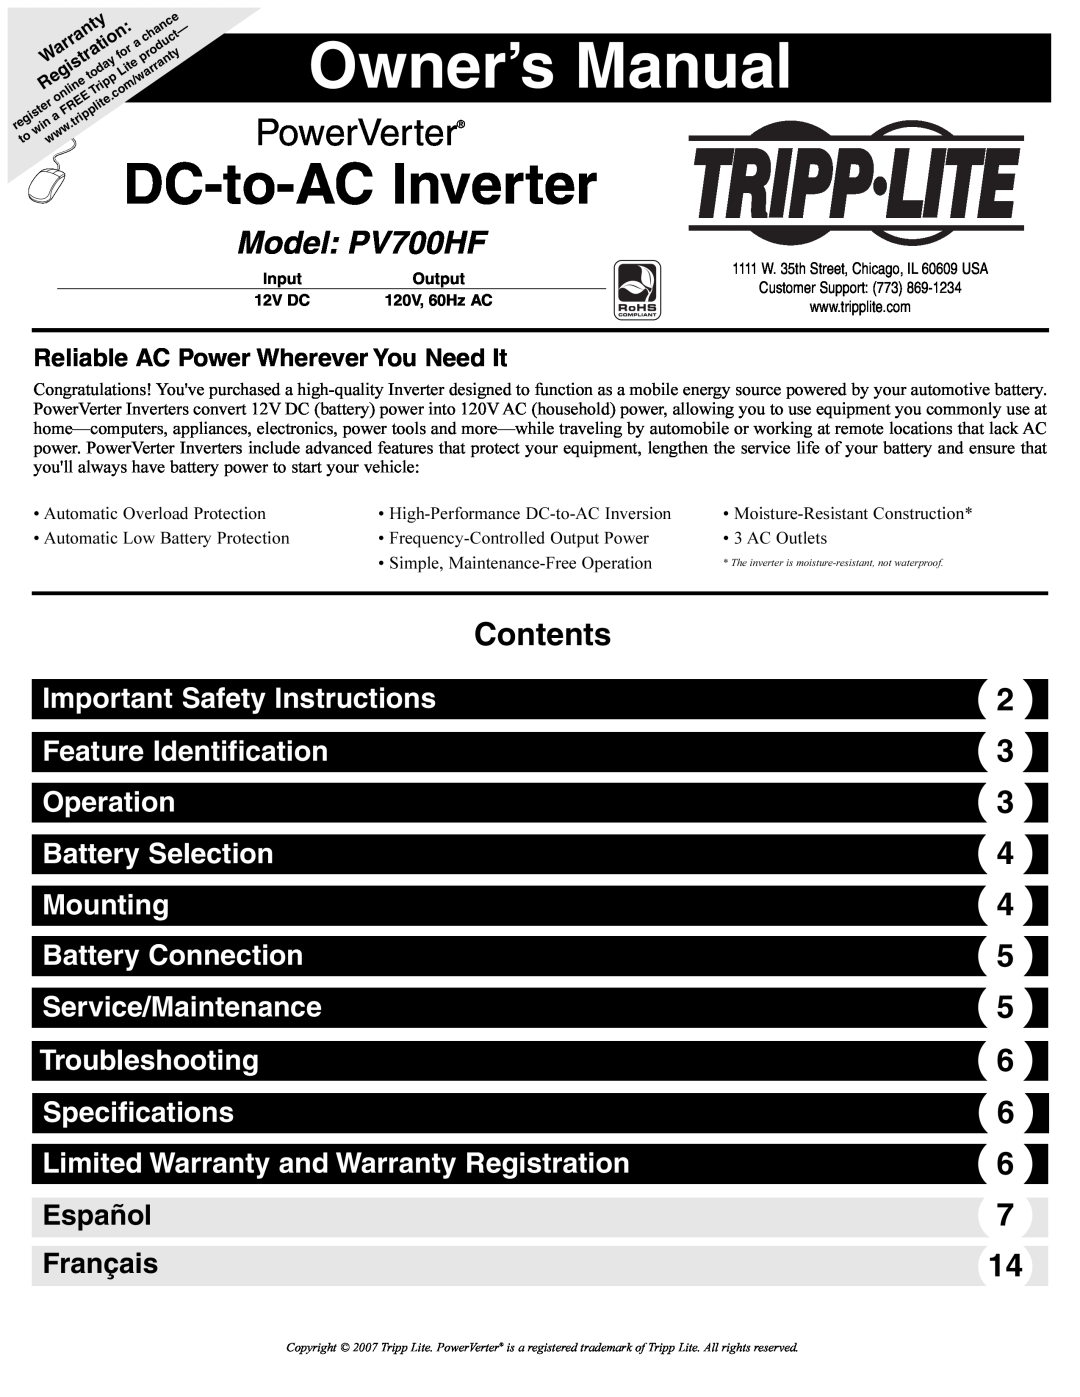 Tripp Lite owner manual DC-to-AC Inverter, PowerVerter, Model PV700HF, Contents, Important Safety Instructions, Español 